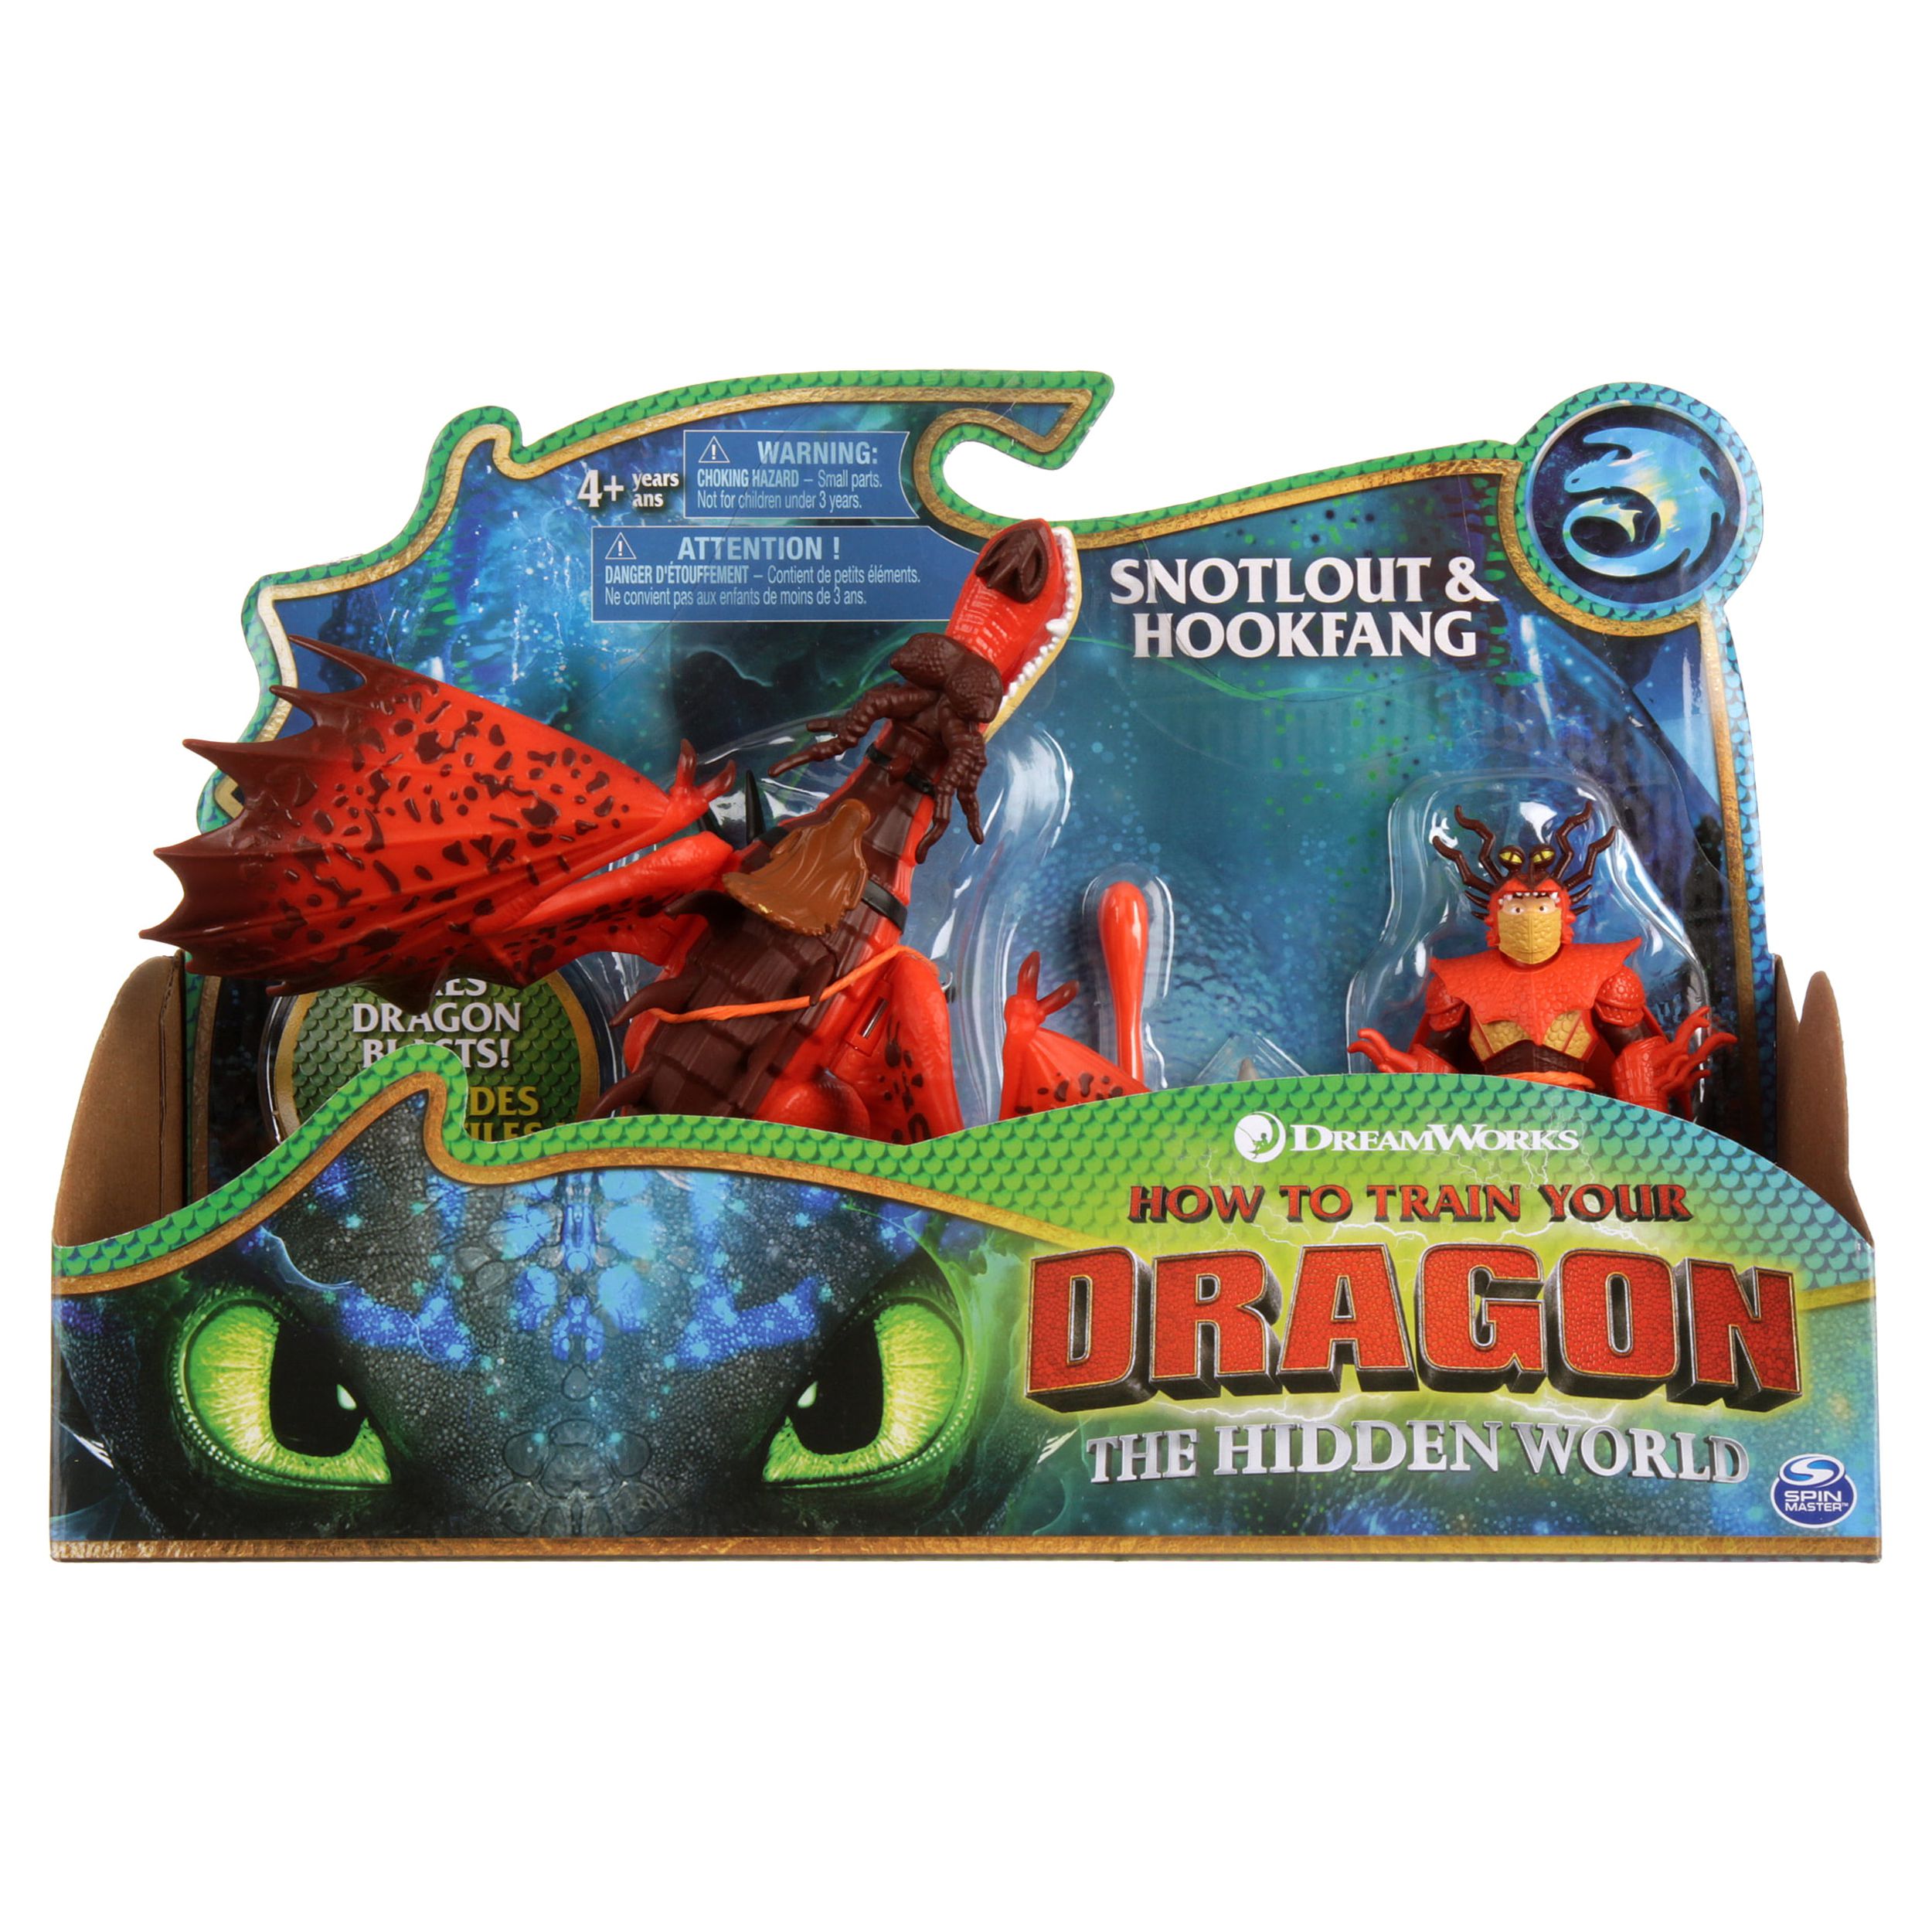 DreamWorks Dragons, Hookfang and Snotlout, Dragon with Armored Viking Figure, for Kids Aged 4 and Up - image 2 of 7